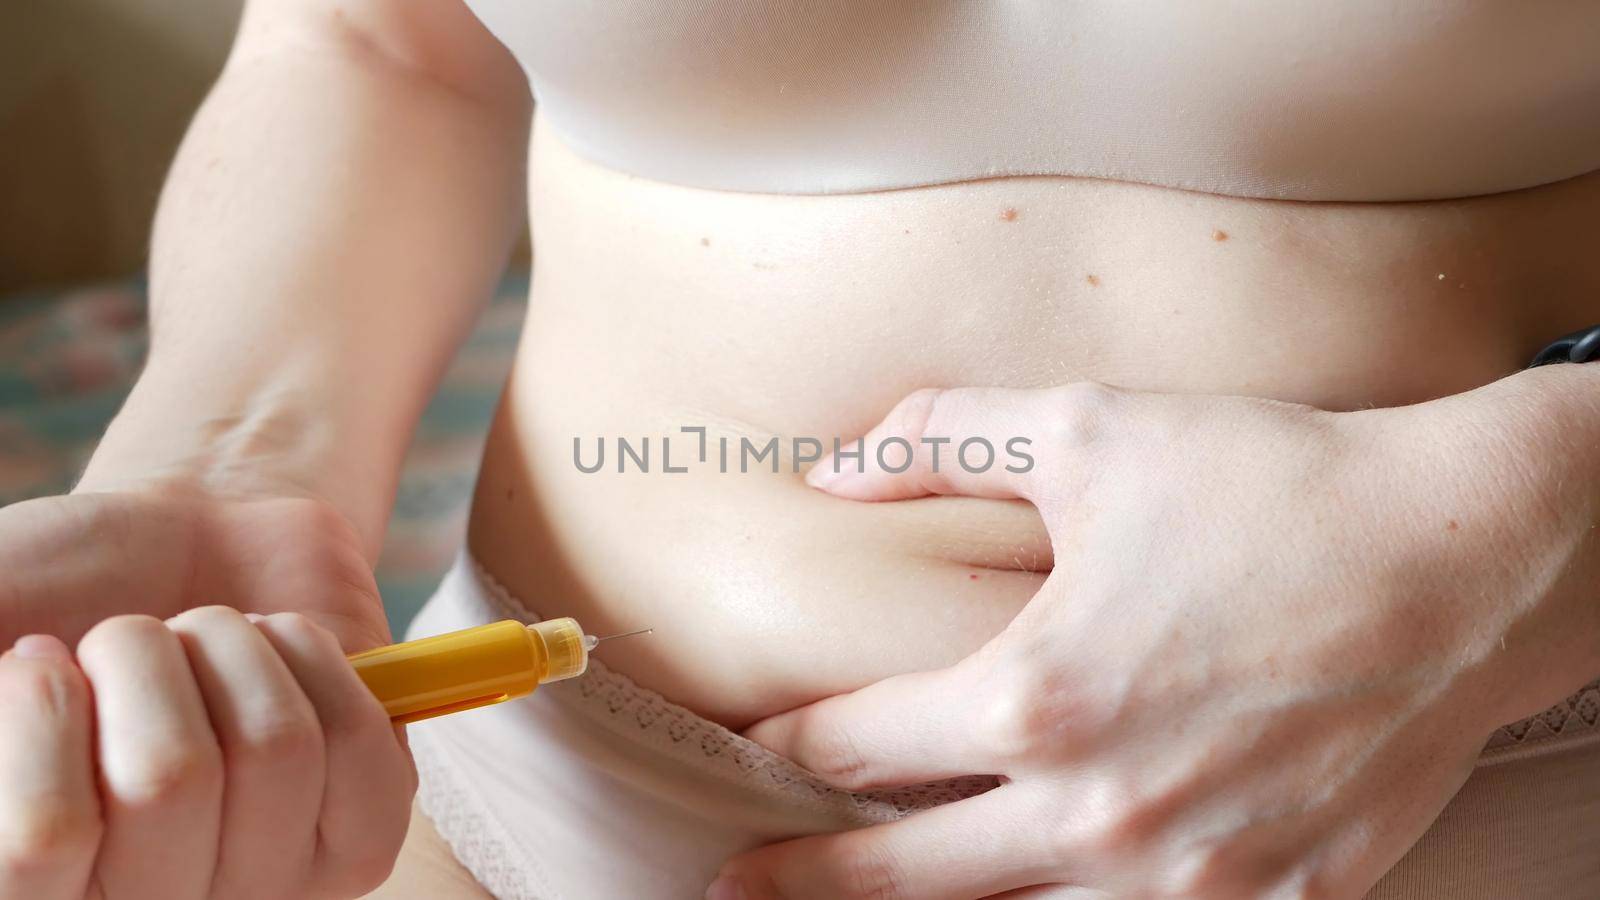 Female makes injection in stomach, belly or abdomen. IVF in vitro fertilisation, reproductive infertility, sterility treatment. Hormonal drugs, ovulation stimulation. Woman injecting insulin, diabetes